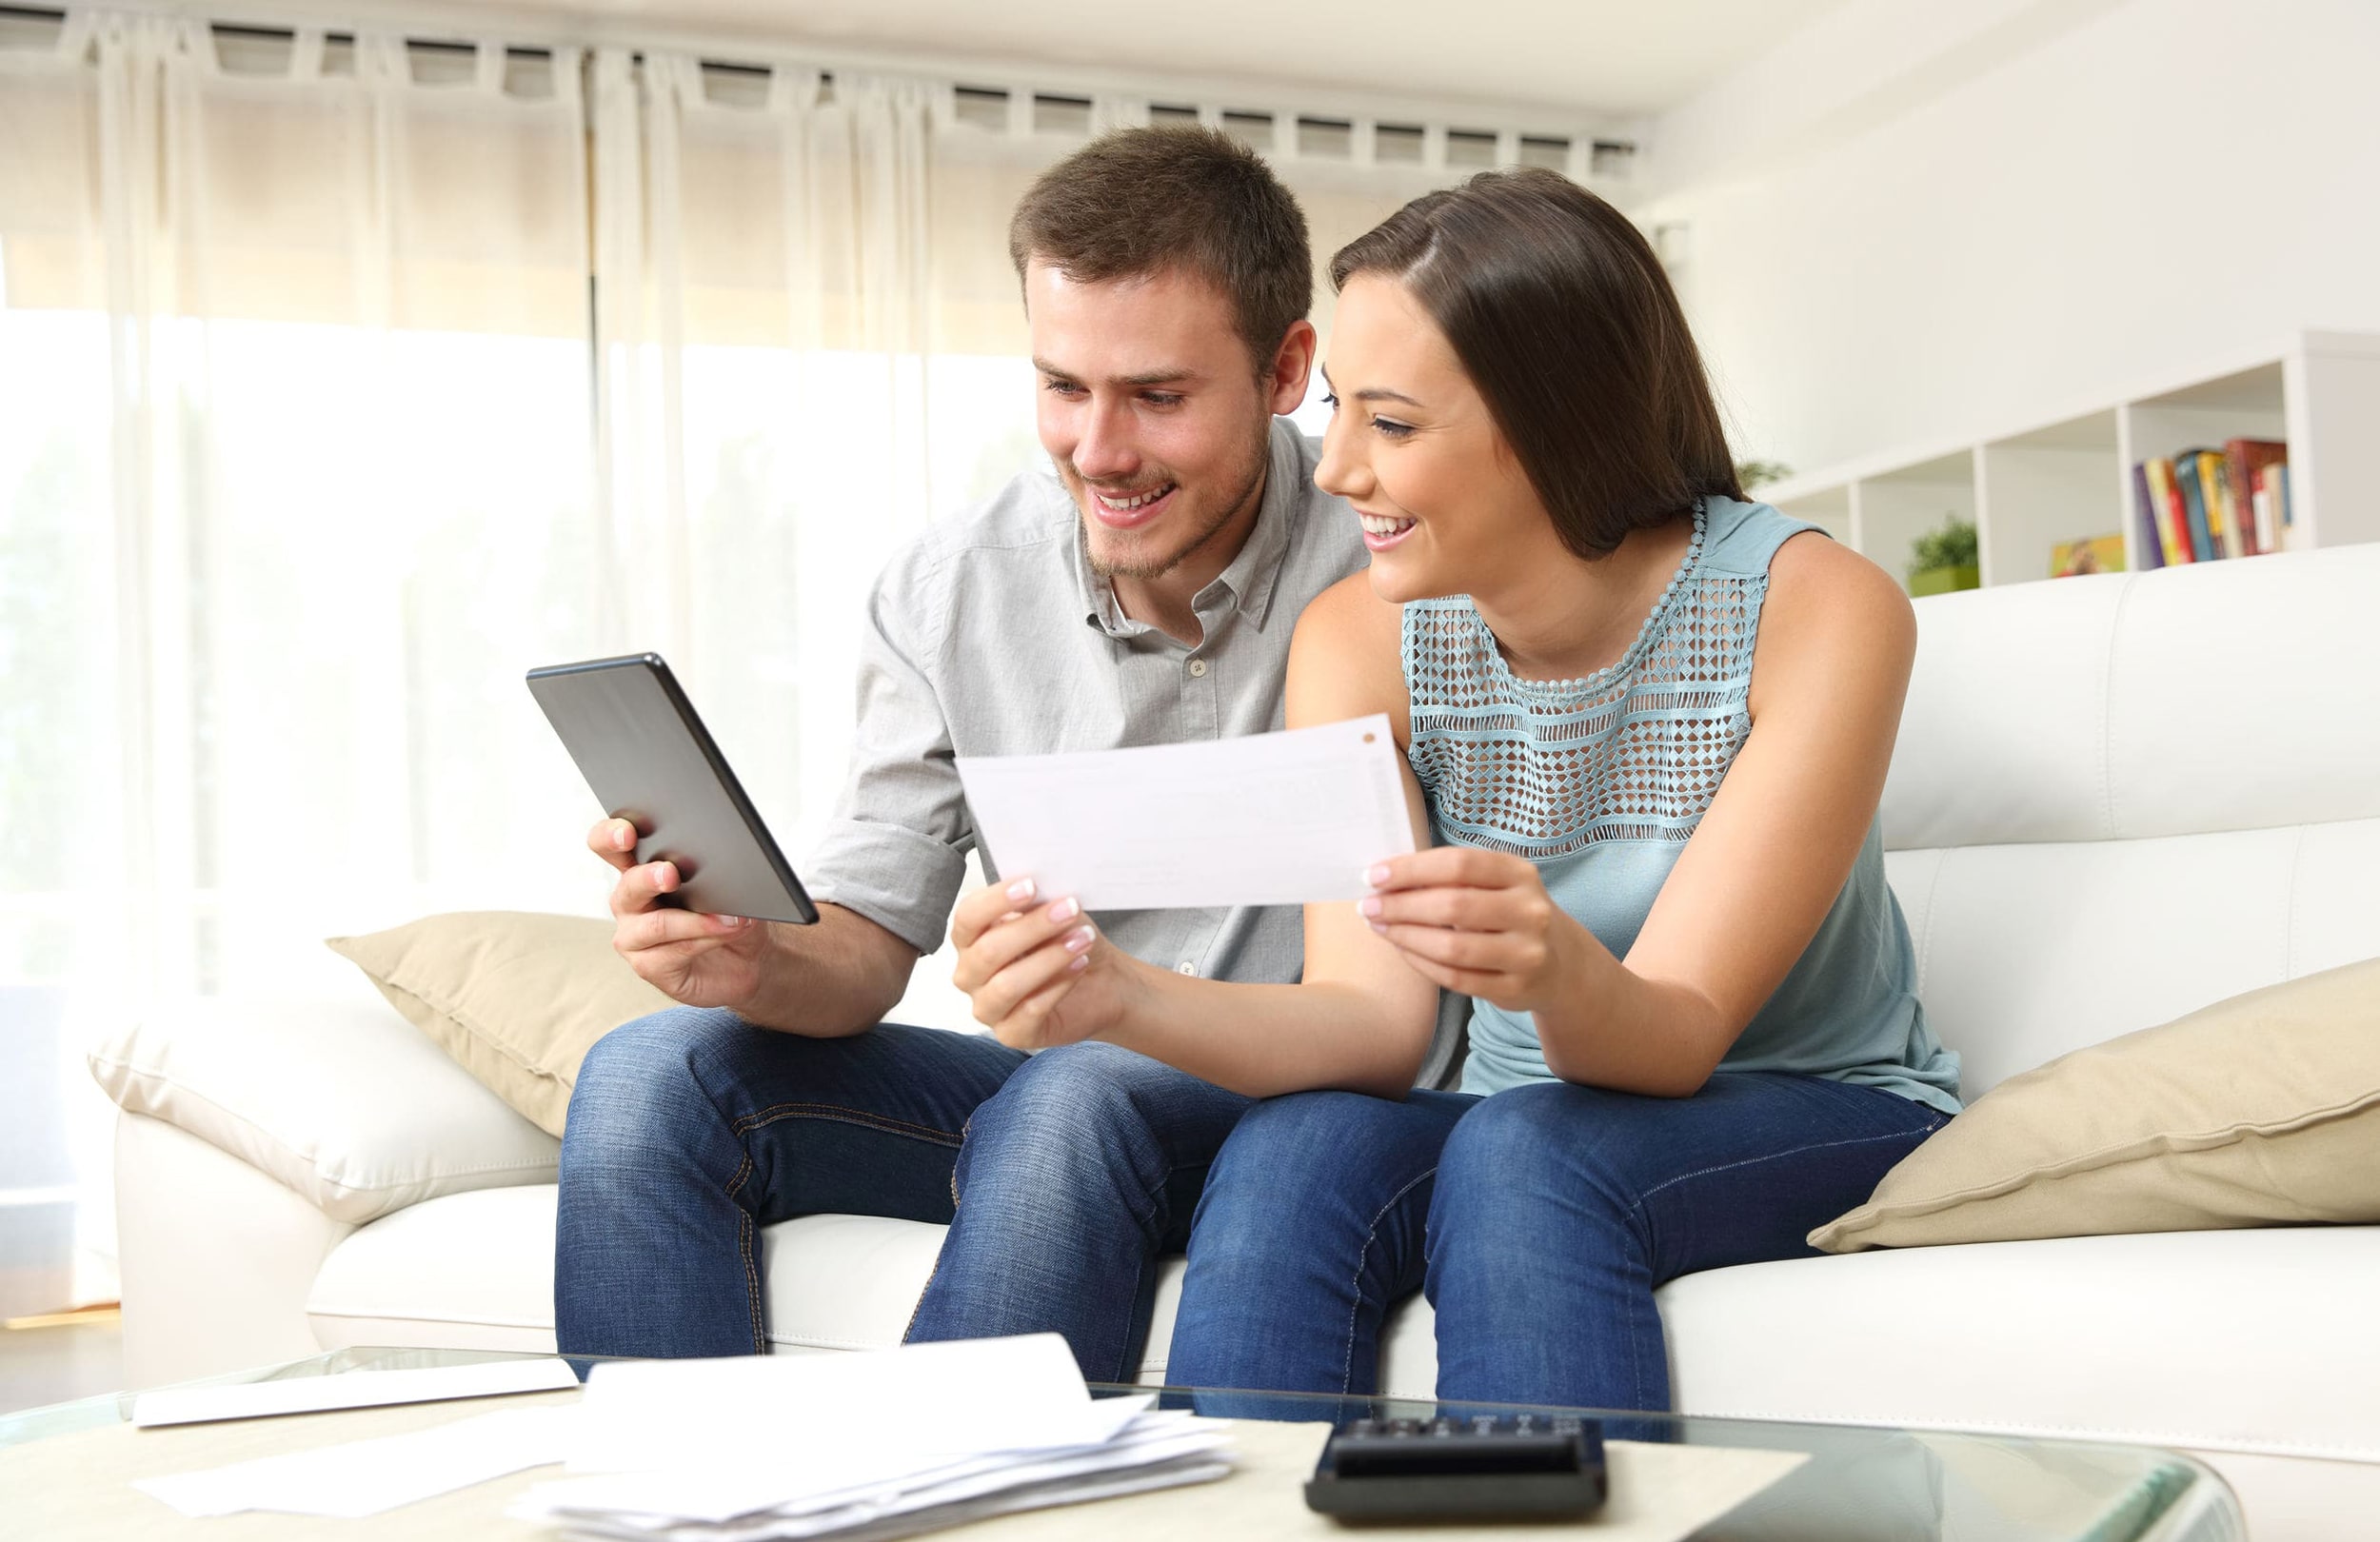 Smiling couple reviewing savings account statement